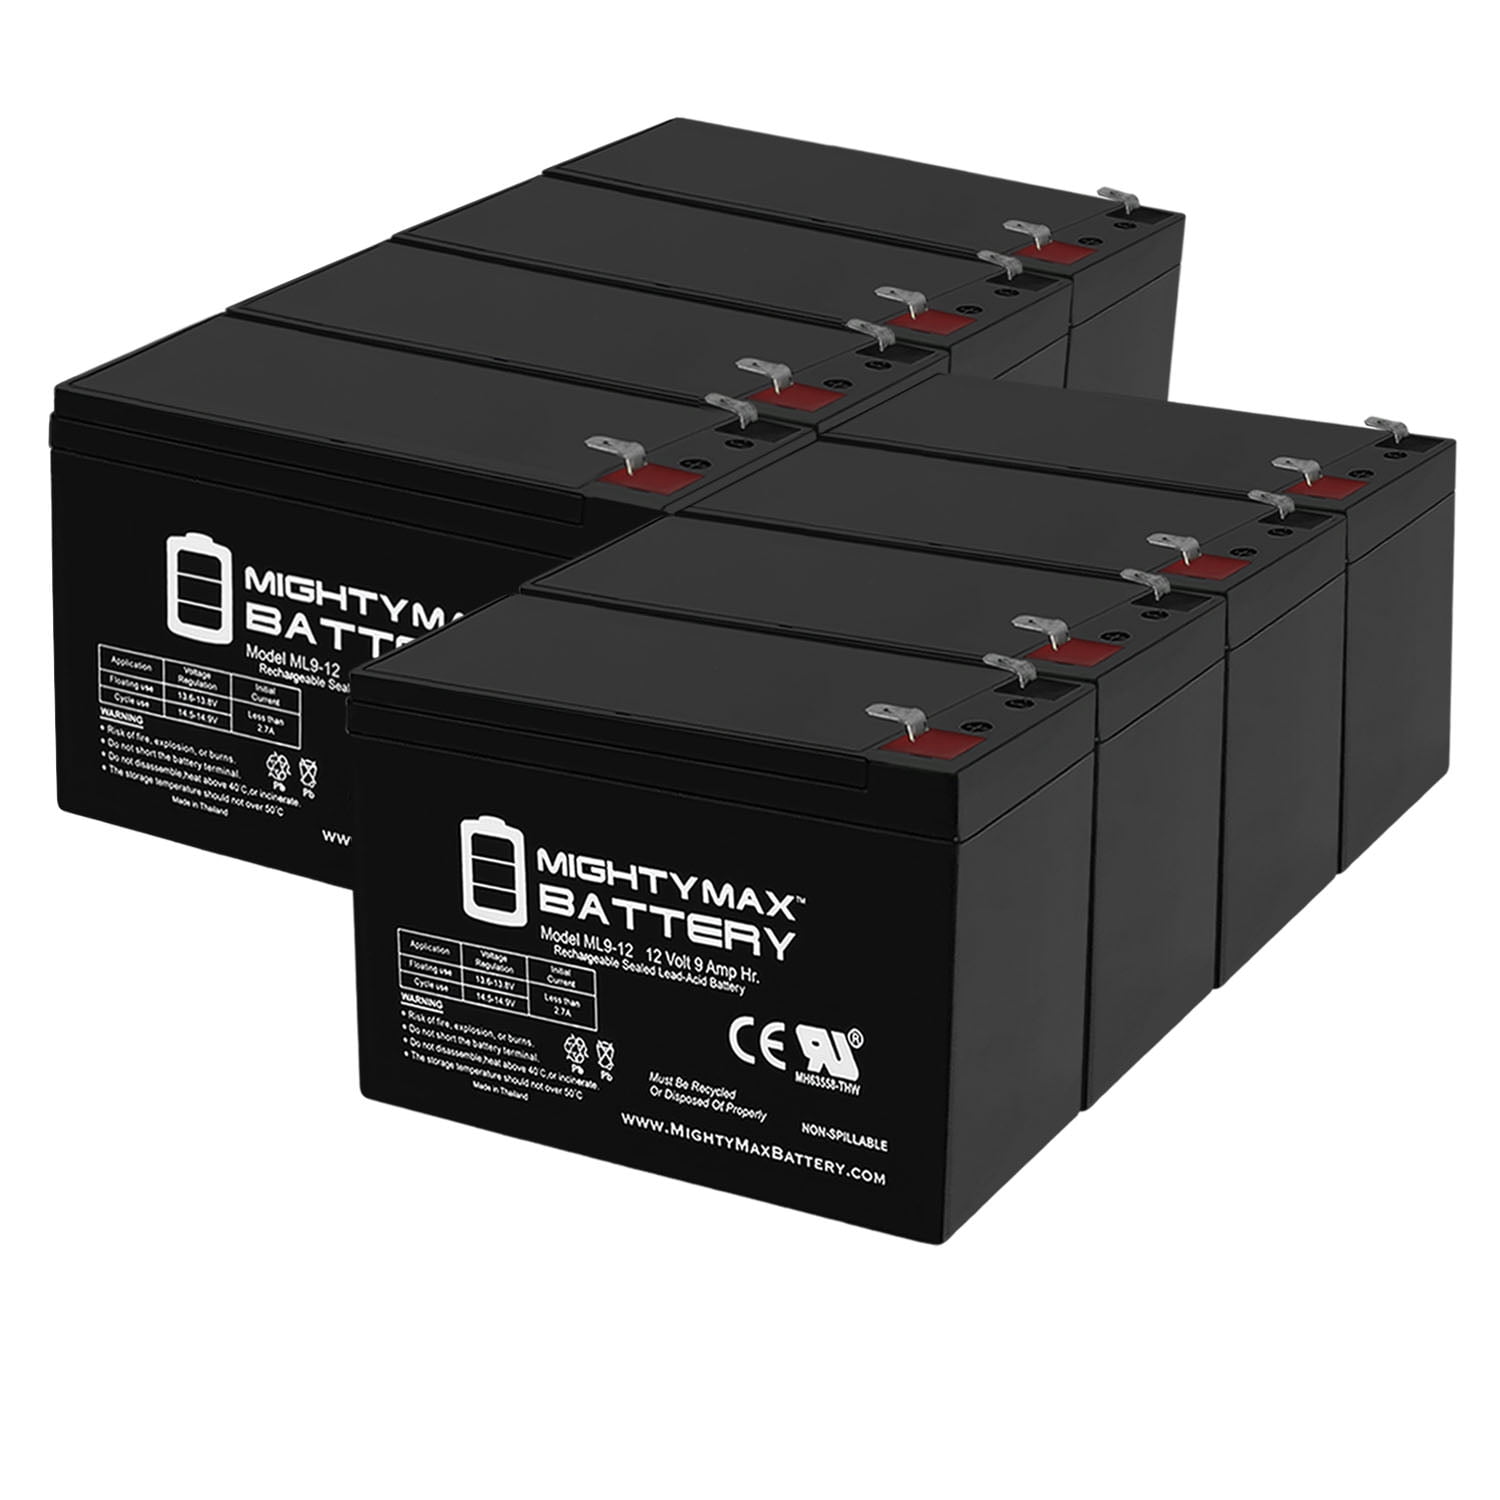 Eaton UPS Model Powerware 5115 Compatible High-Rate Discharge Series Replacement Battery Backup Set